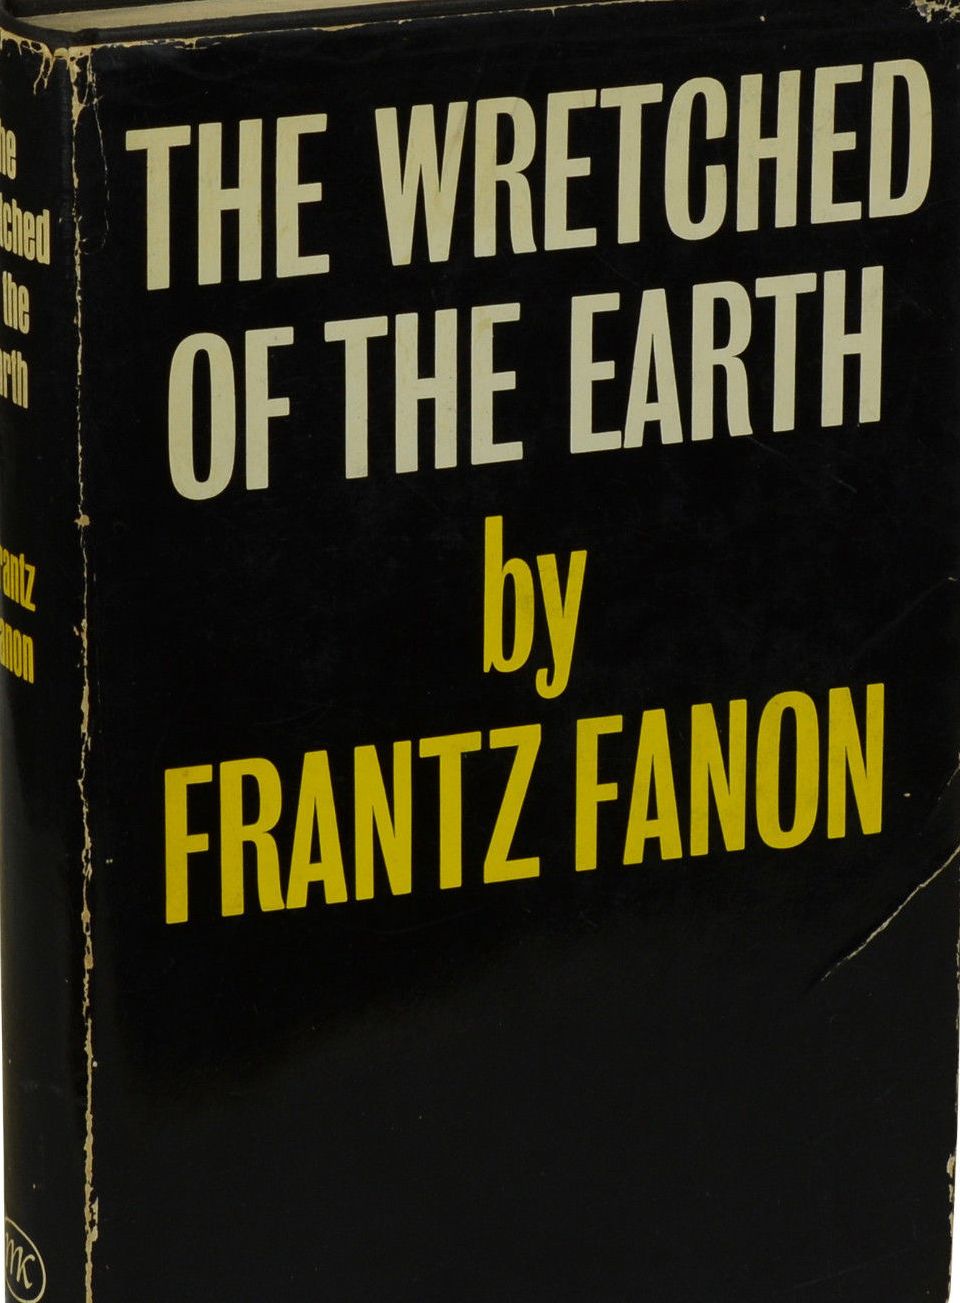 Taking Evidence From Frantz Fanon on Xenophobia in South Africa